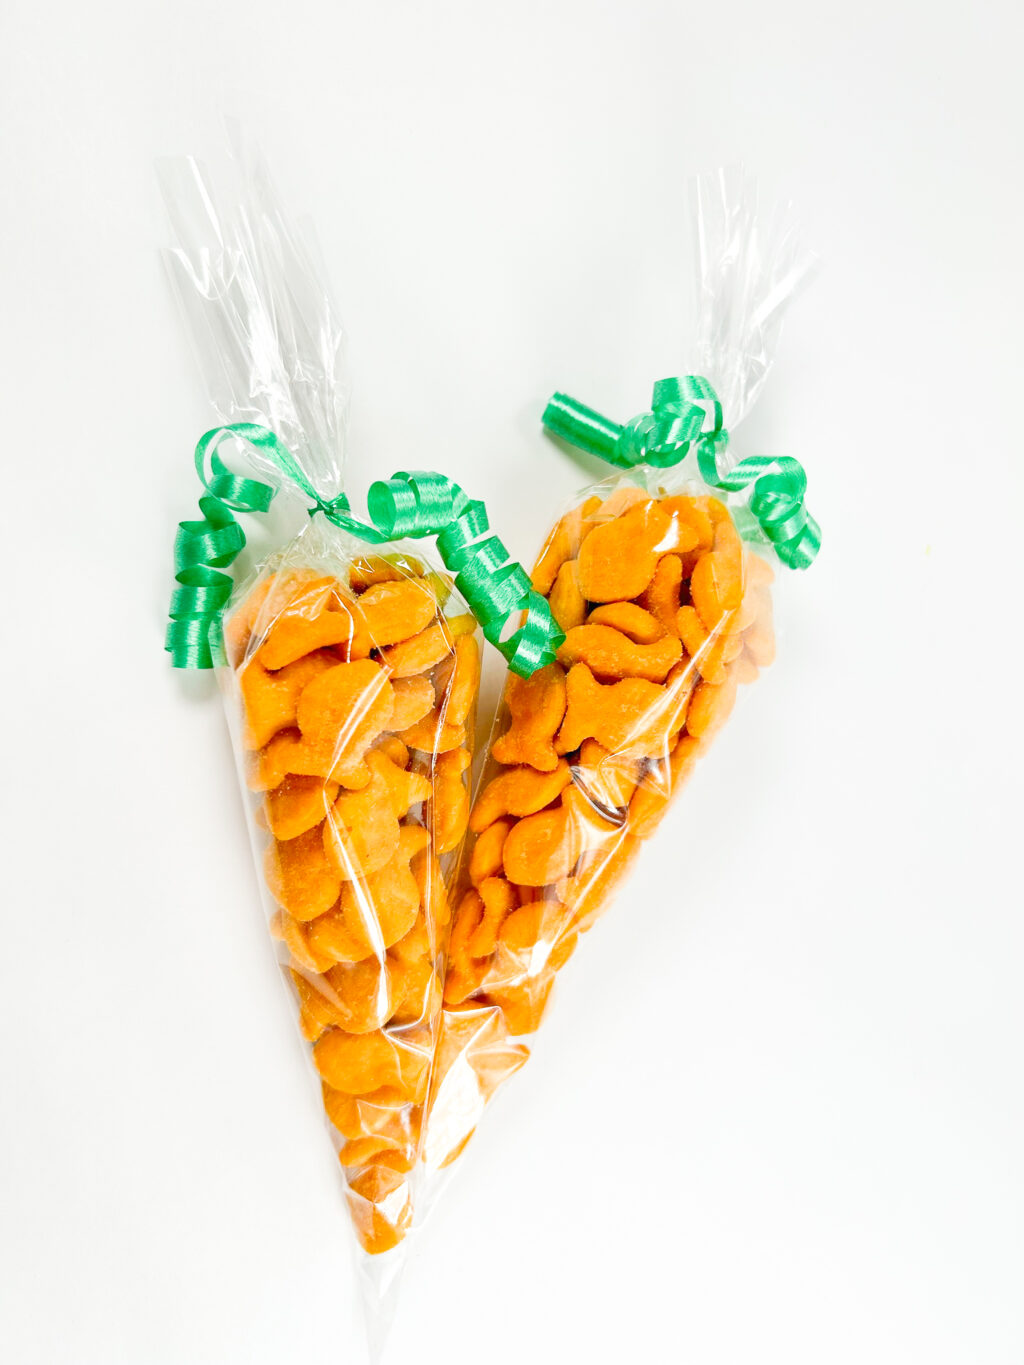 golfish carrot treat bags on white table